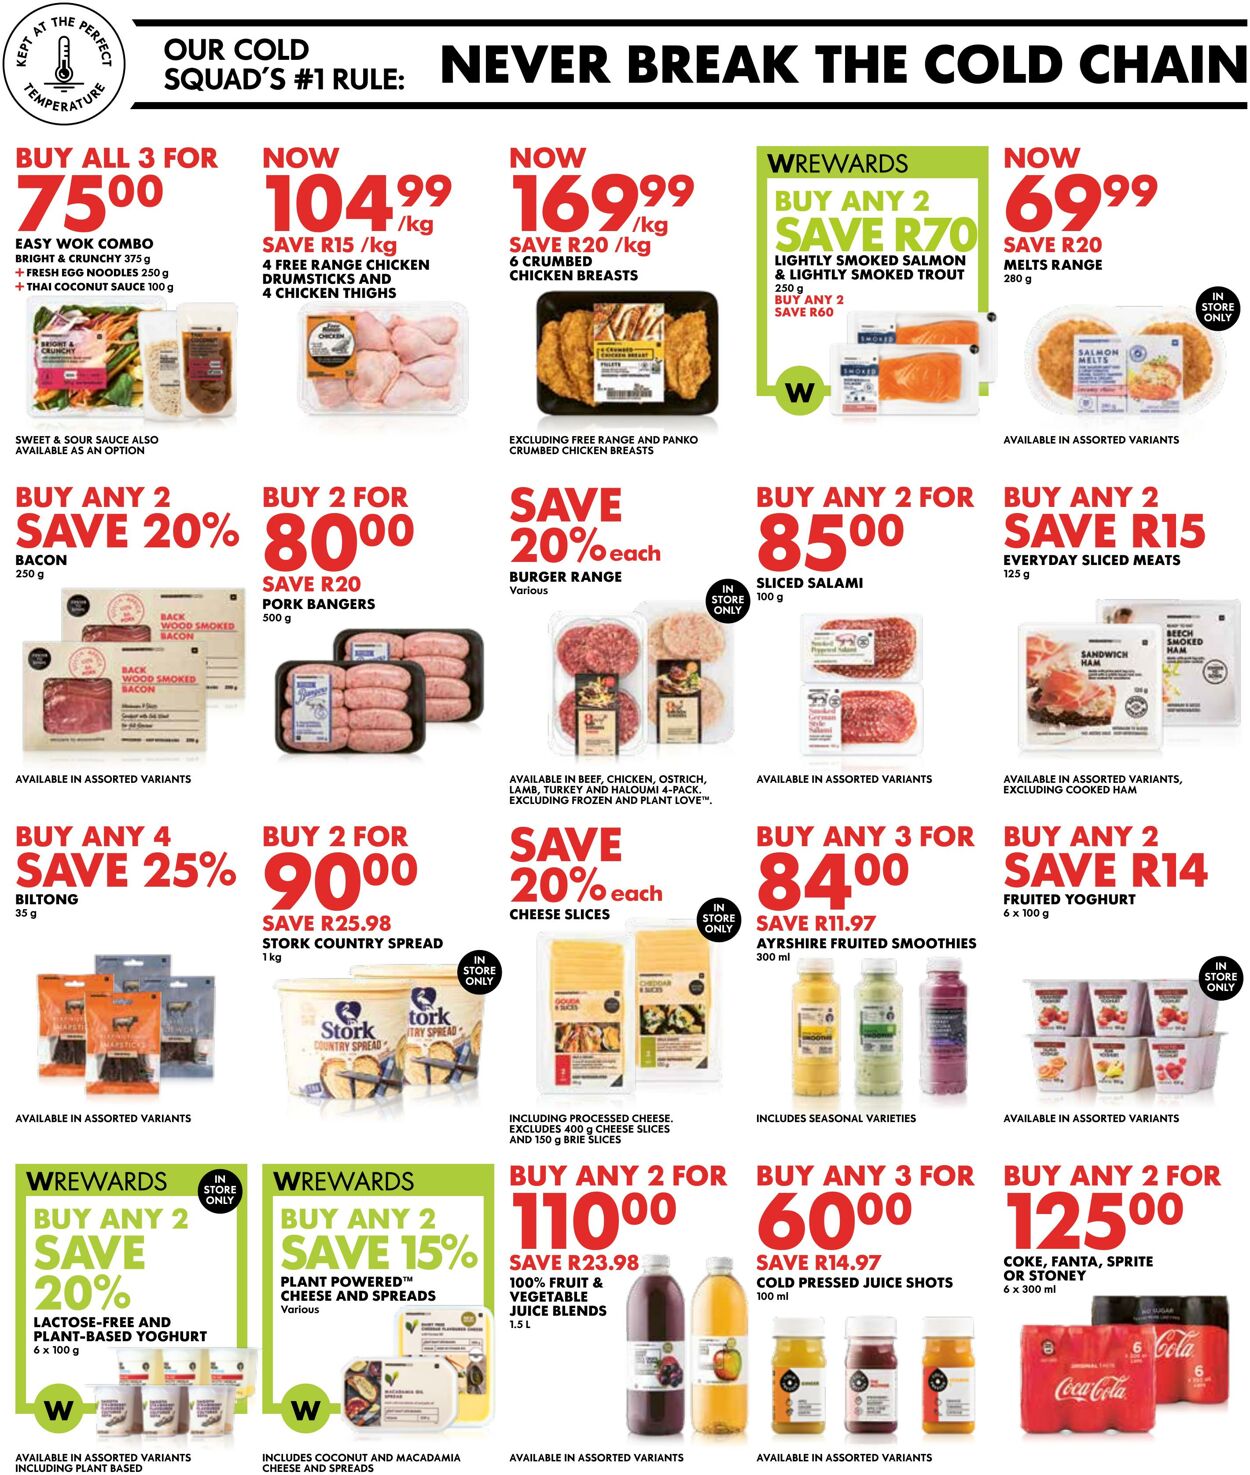 Special Woolworths 08.01.2024 - 21.01.2024